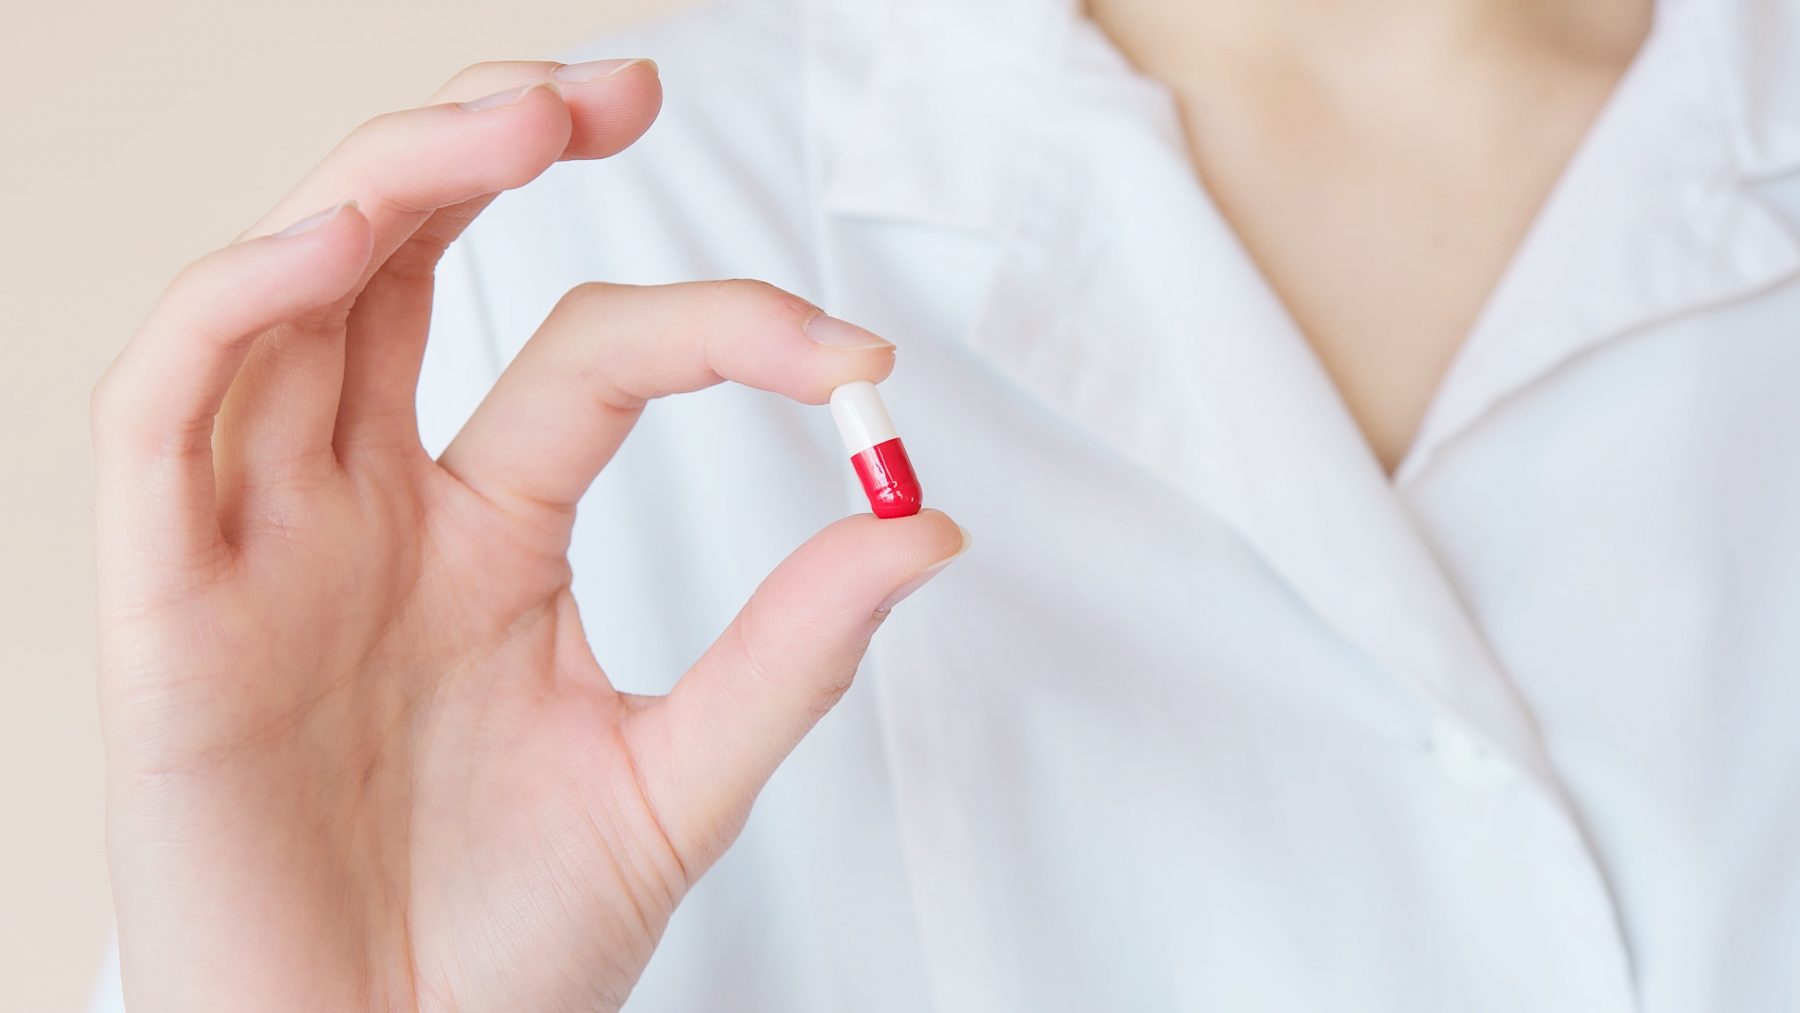 A person holding a pill in their hand.